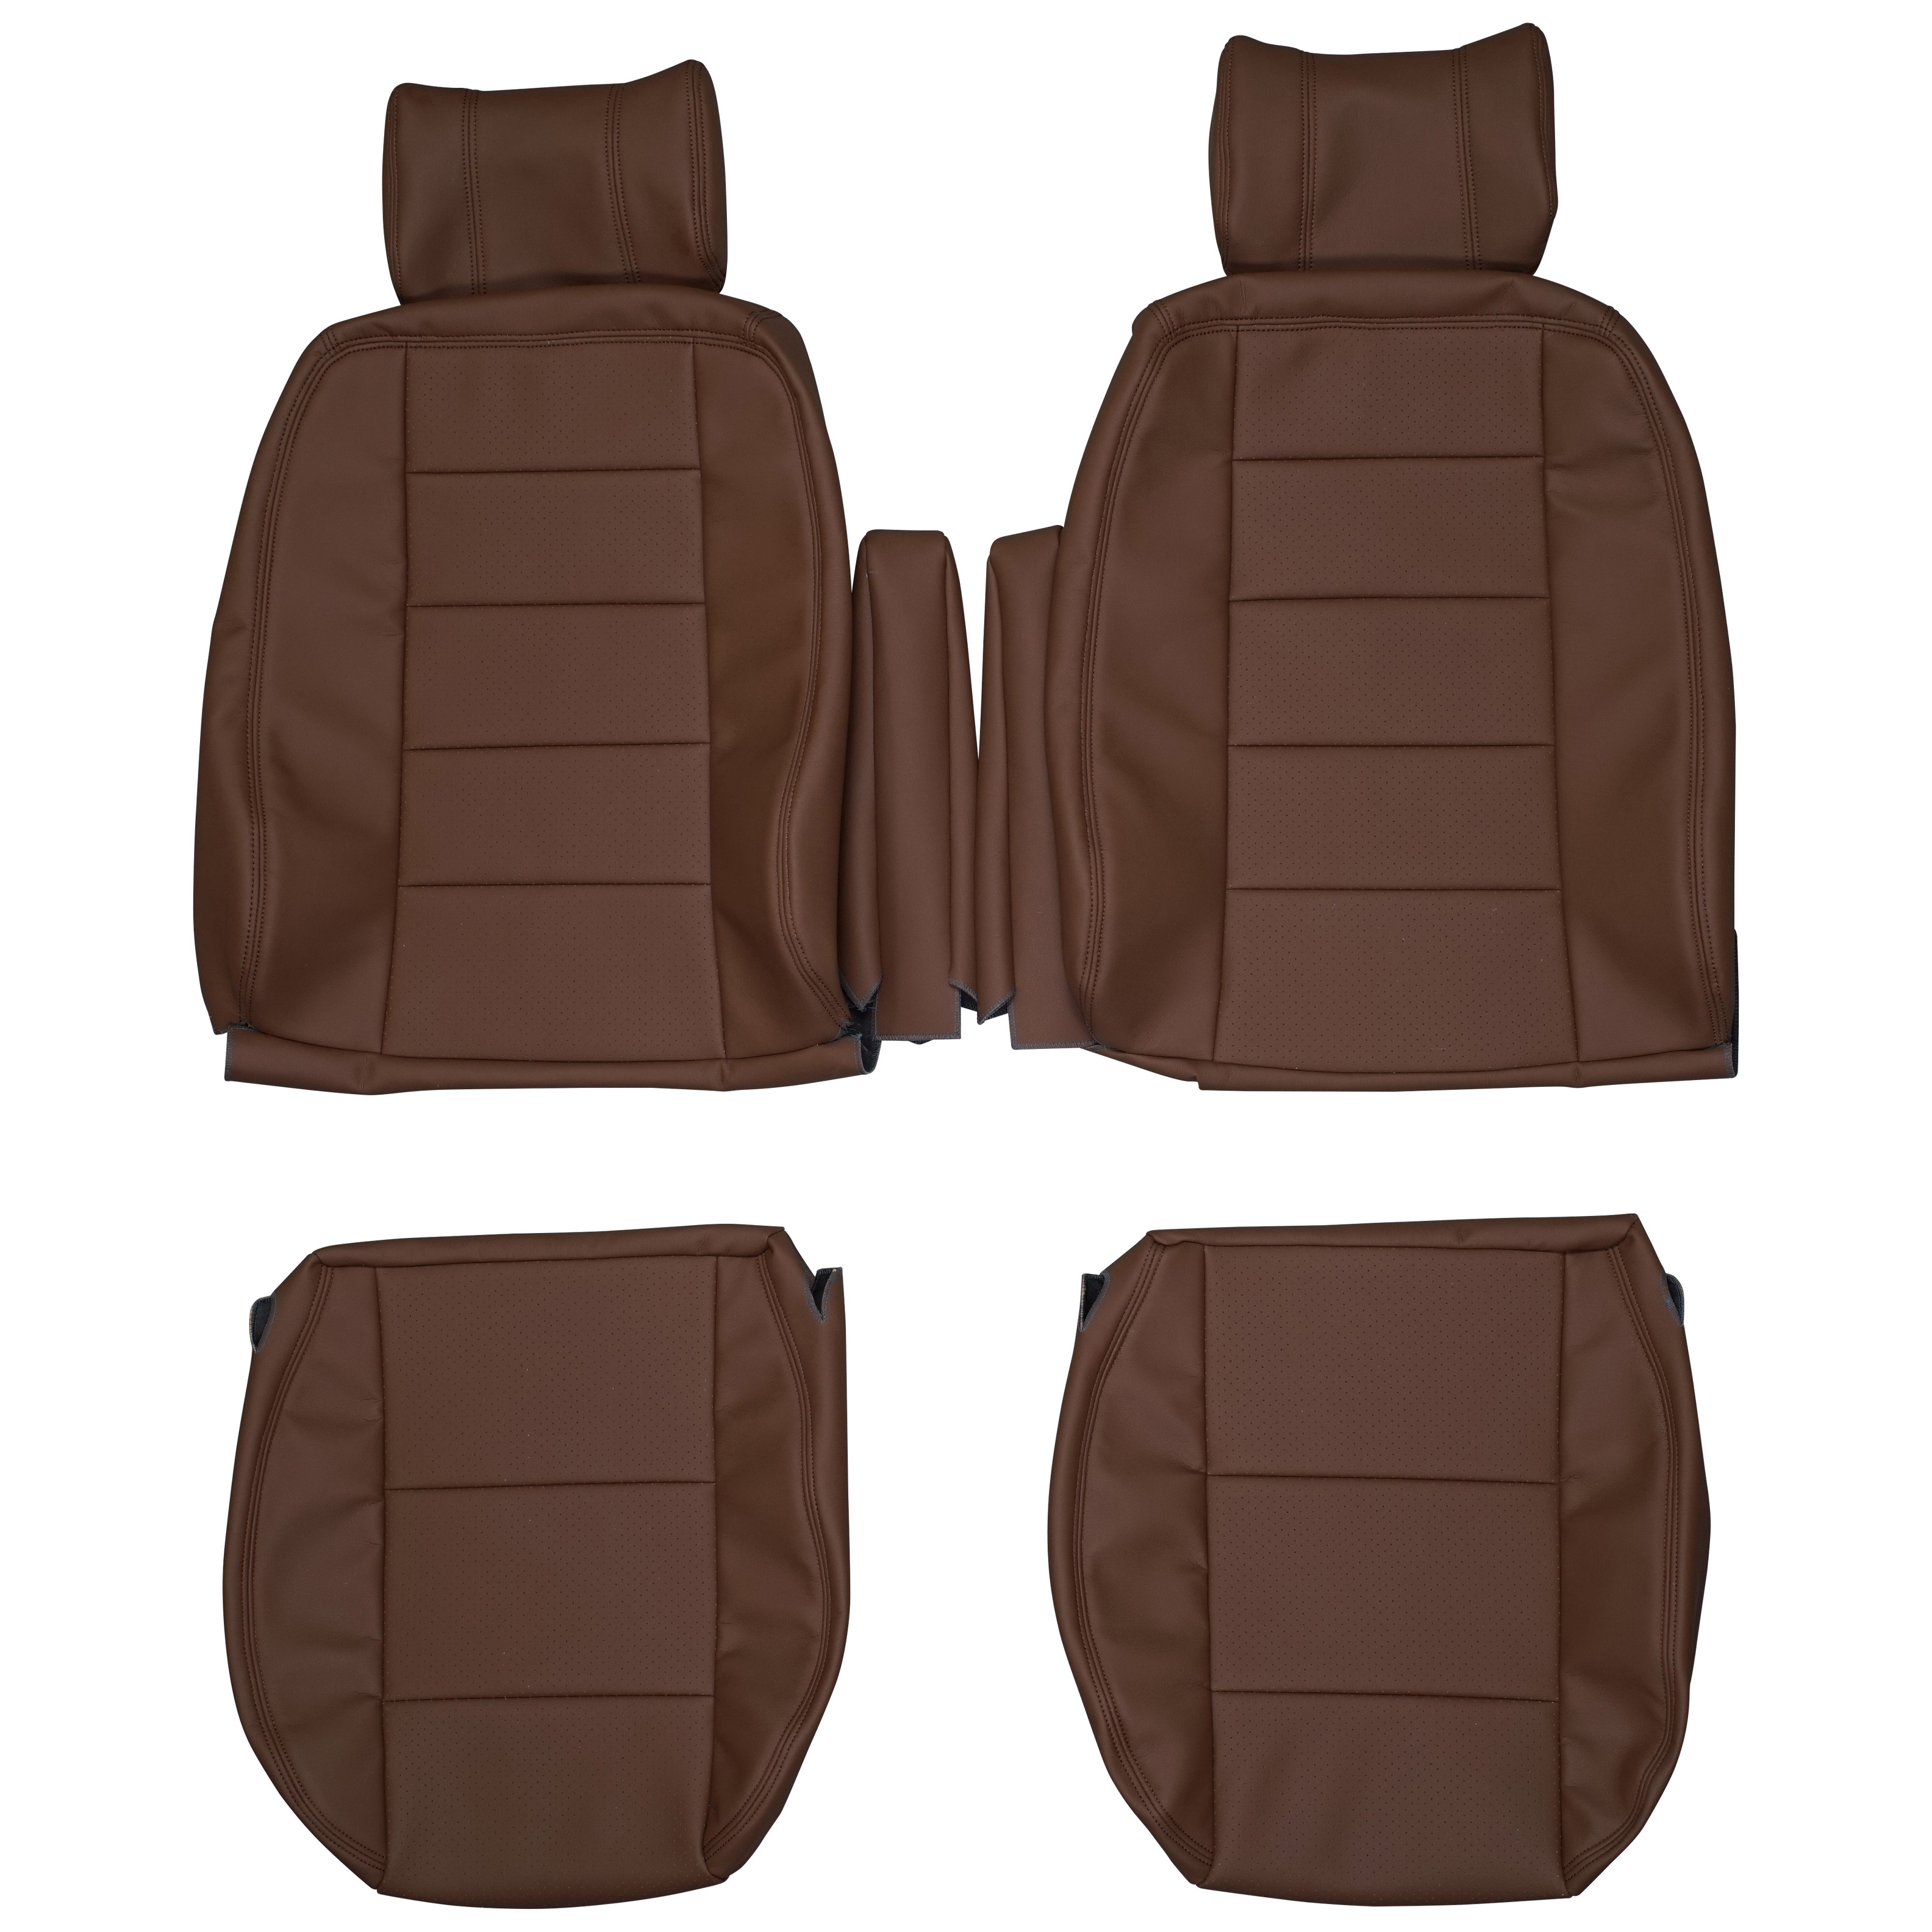 1990-1995 Range Rover Classic SWB Custom Real Leather Seat Covers (Front) -  Lseat.com